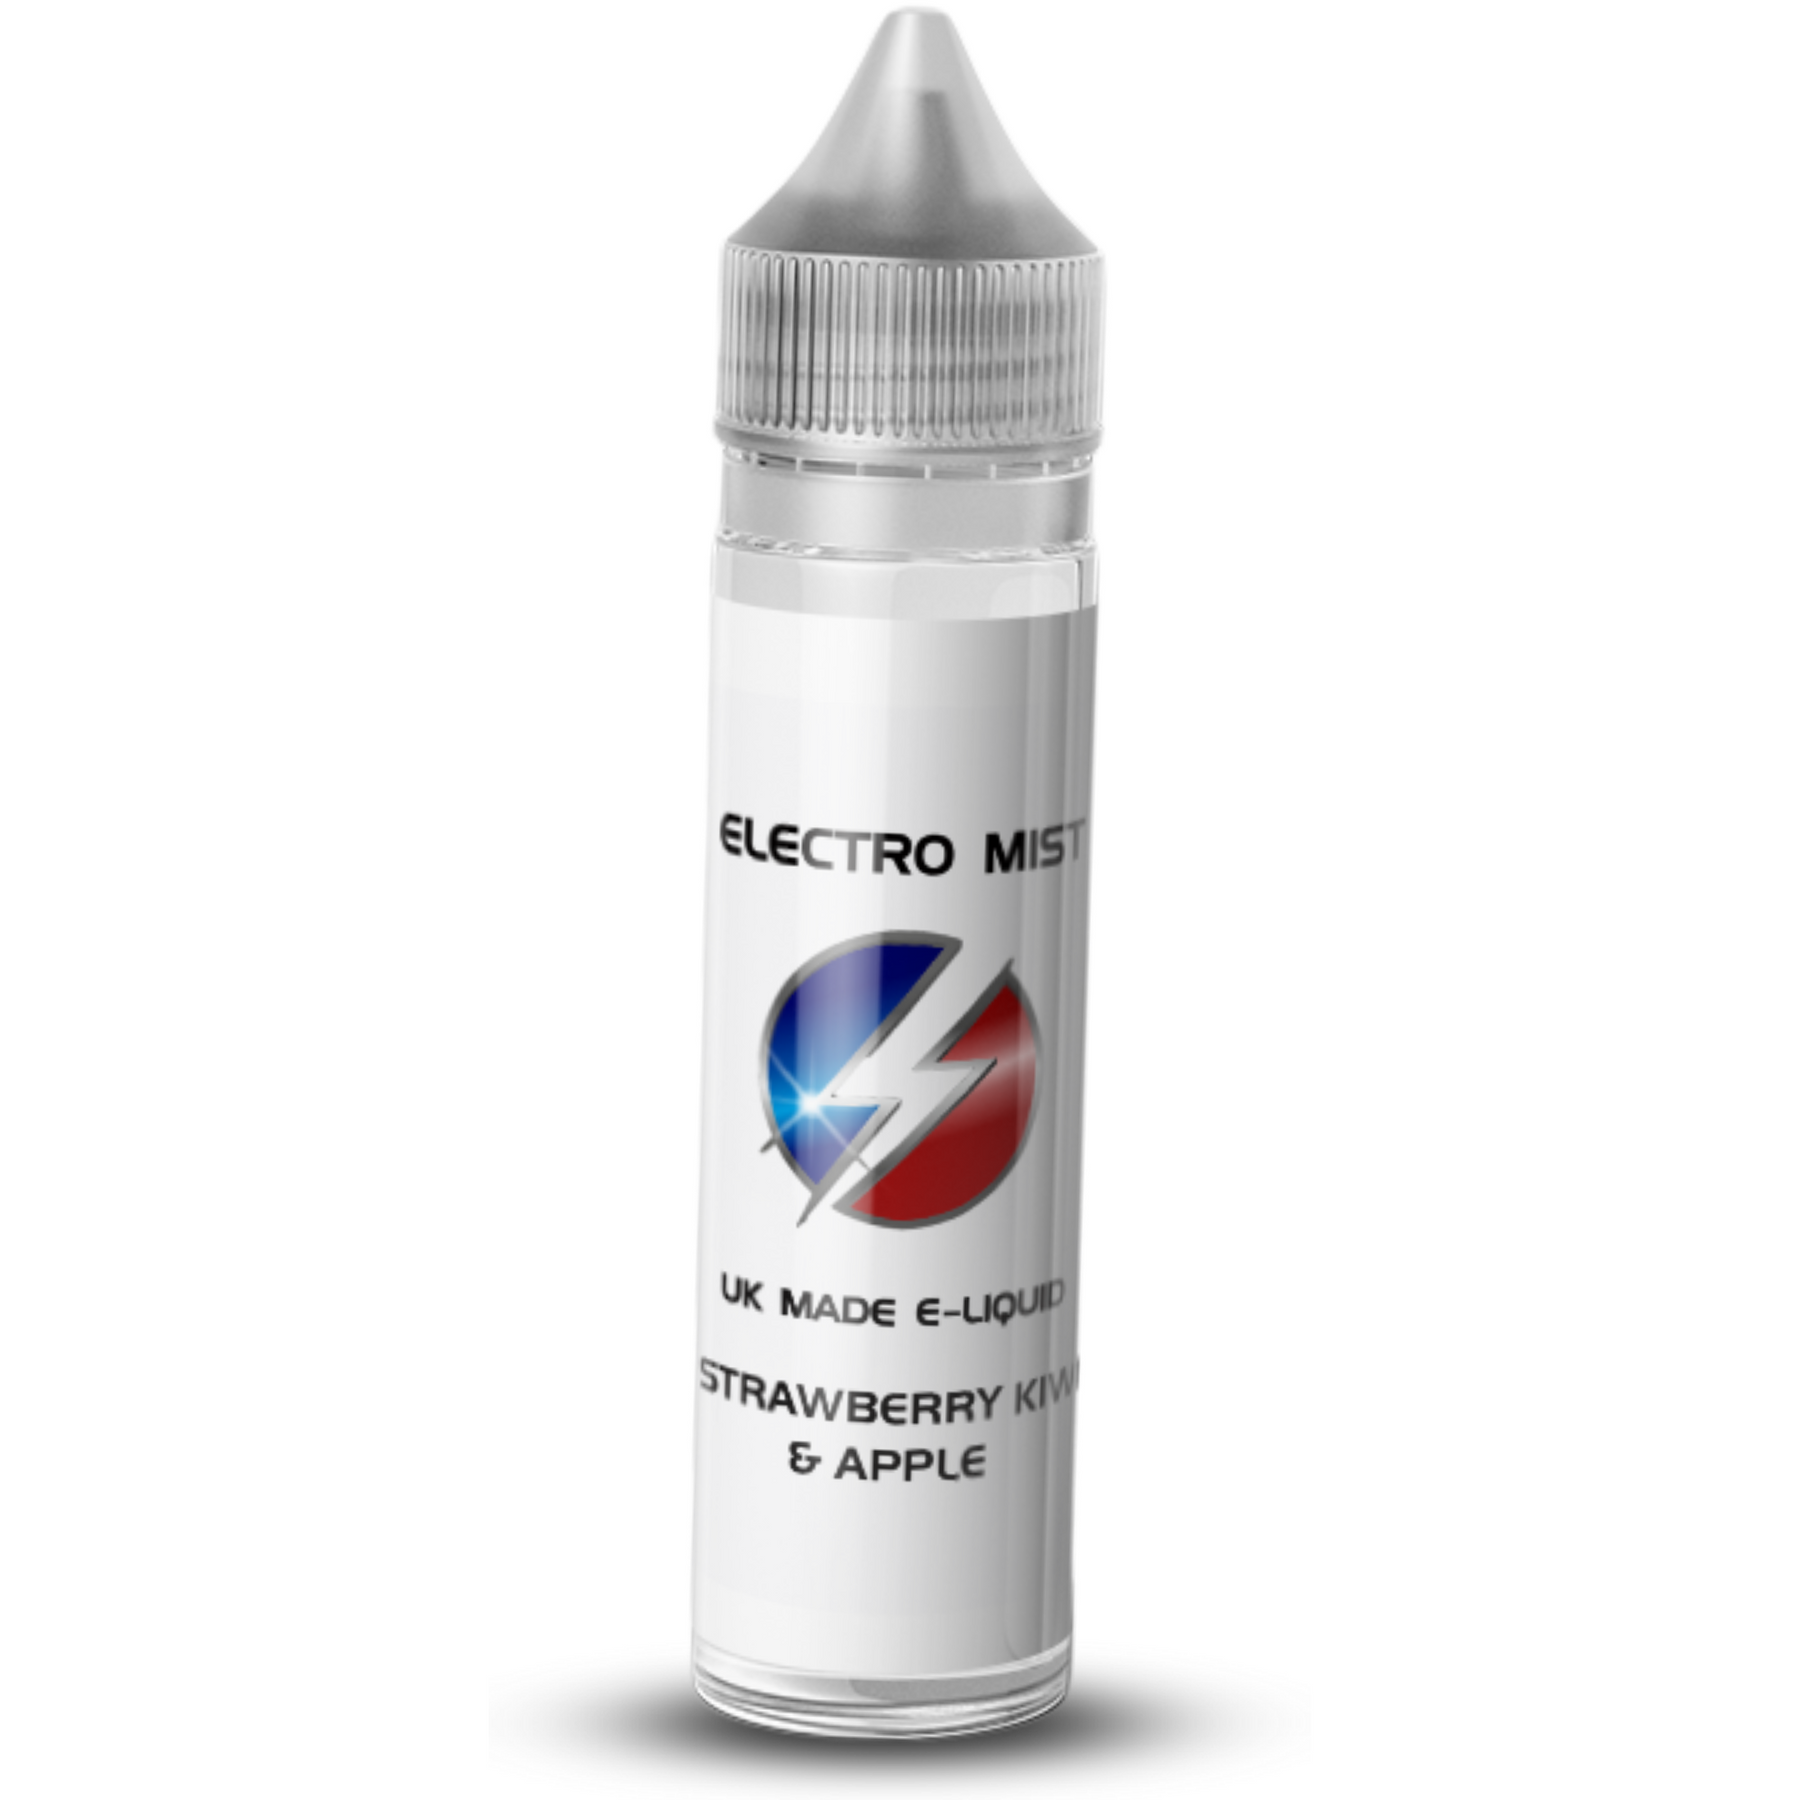 Electromist 50ml, the brand that you can trust for amazing flavour. Get your taste buds ready for a Strawberry Kiwi & Apple flavour sensation. 0mg Nicotine. ejuice, vape pen, eliquid, e cigarette, 50ml, vaping, PG, VG, 70/30, vape liquid, Flavour, Strawberry Kiwi & Apple, cloud.